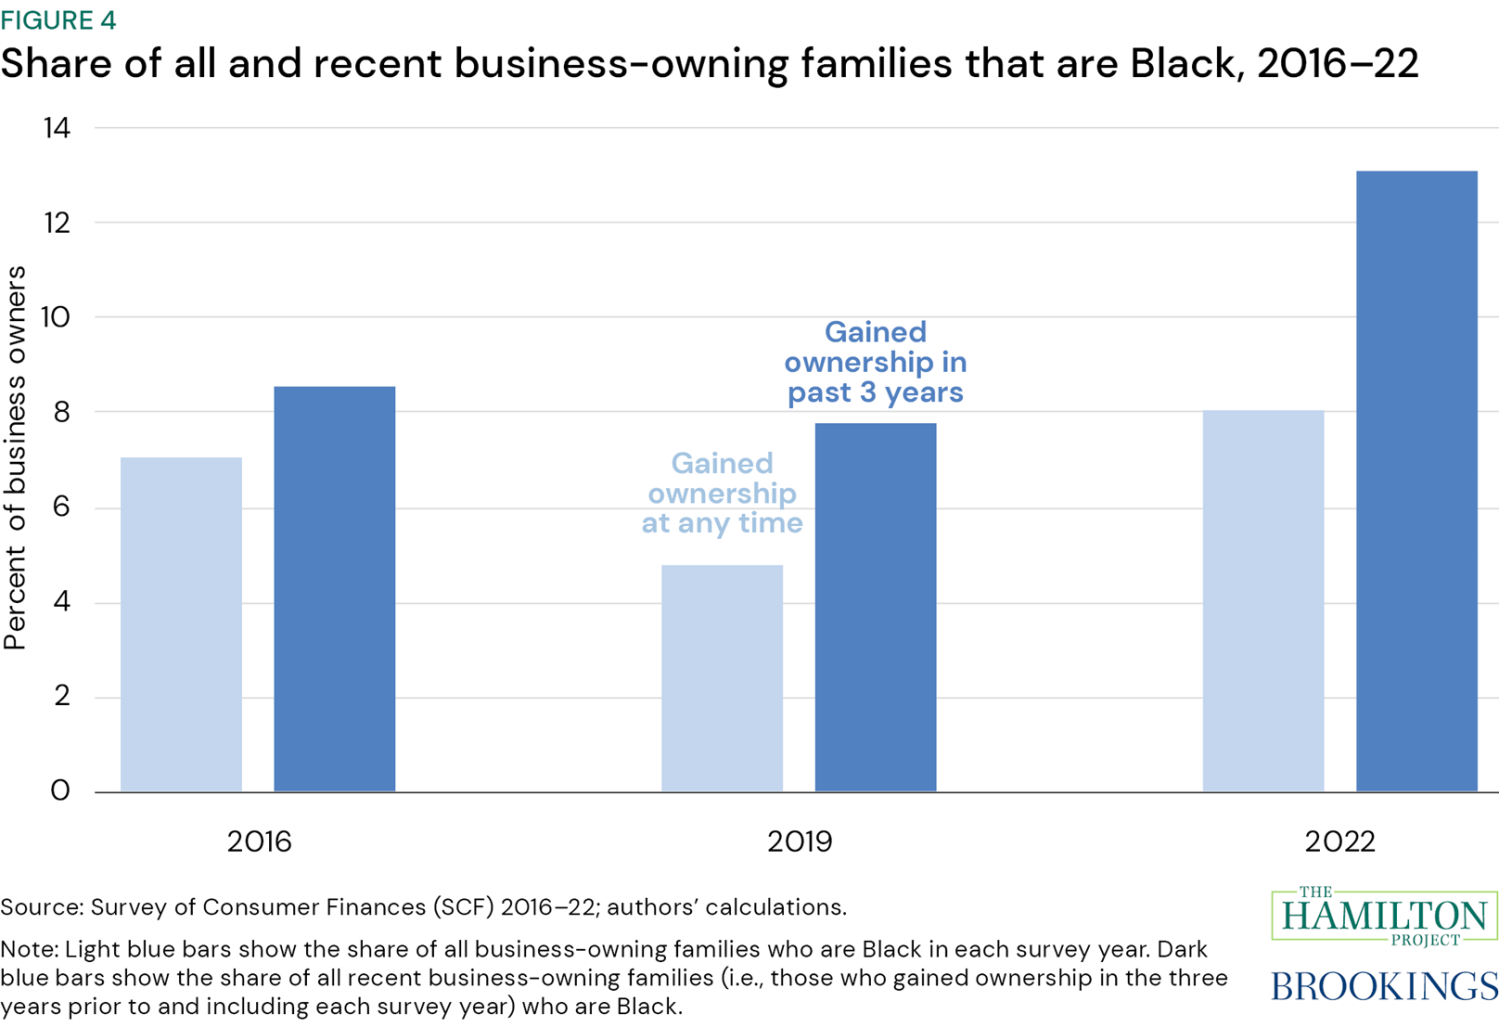 Figure 4: Share of all and recent business-owning families that are Black, 2016-22. Figure 4 shows the information in figures 1 and 2 for just Black families.